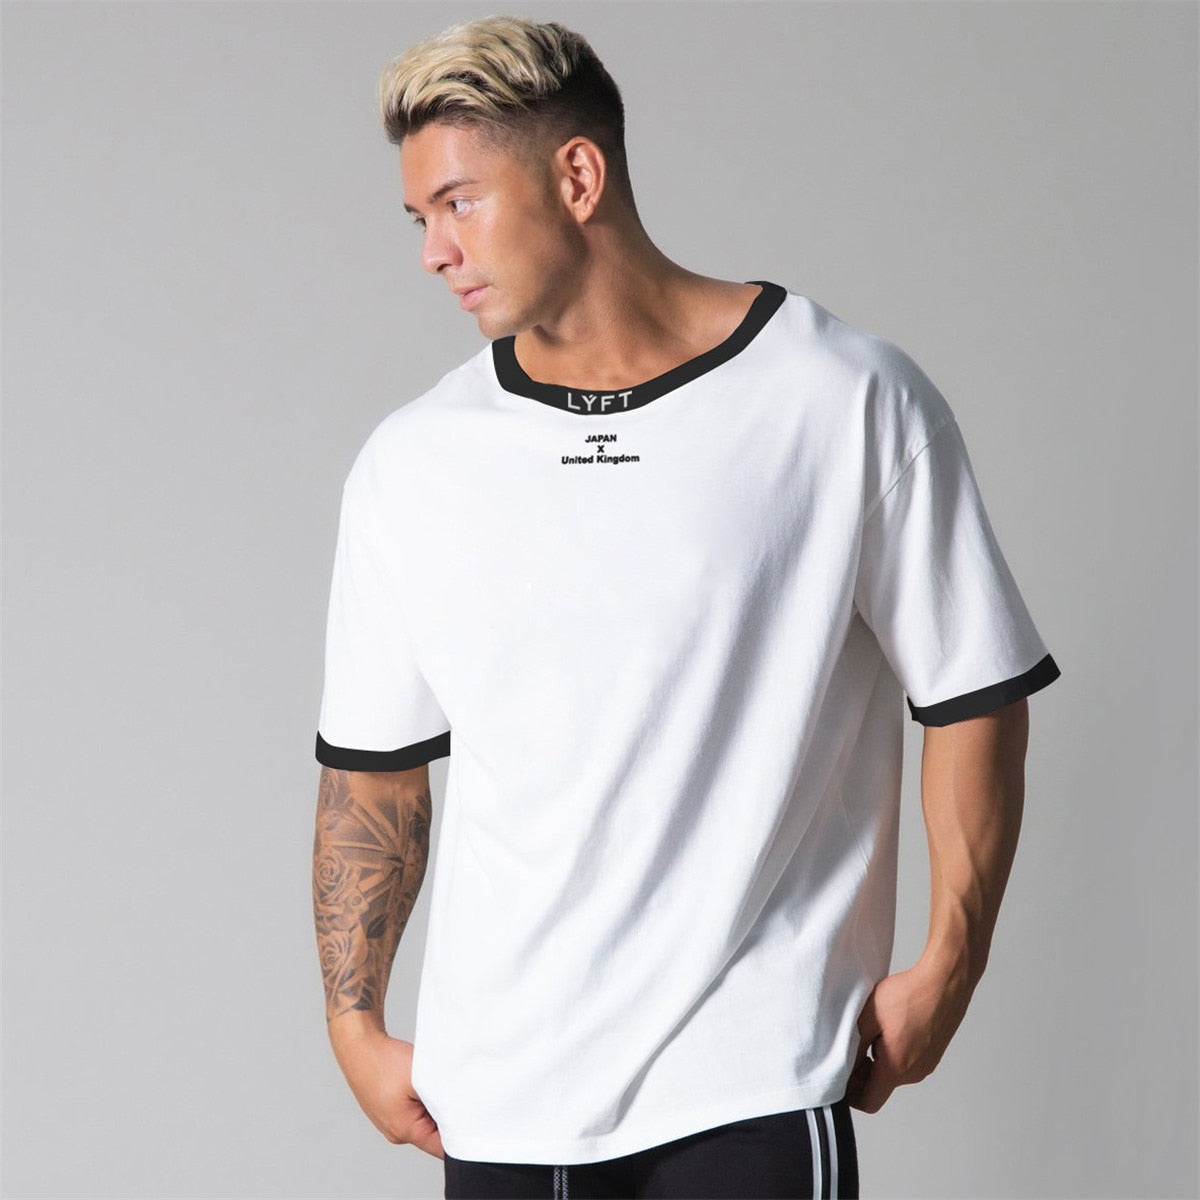 Fashion Casual Loose T-shirt Men Cotton Fitness Workout Short Sleeve Shirt Male Gym Sports Tee Tops Summer Training Clothing